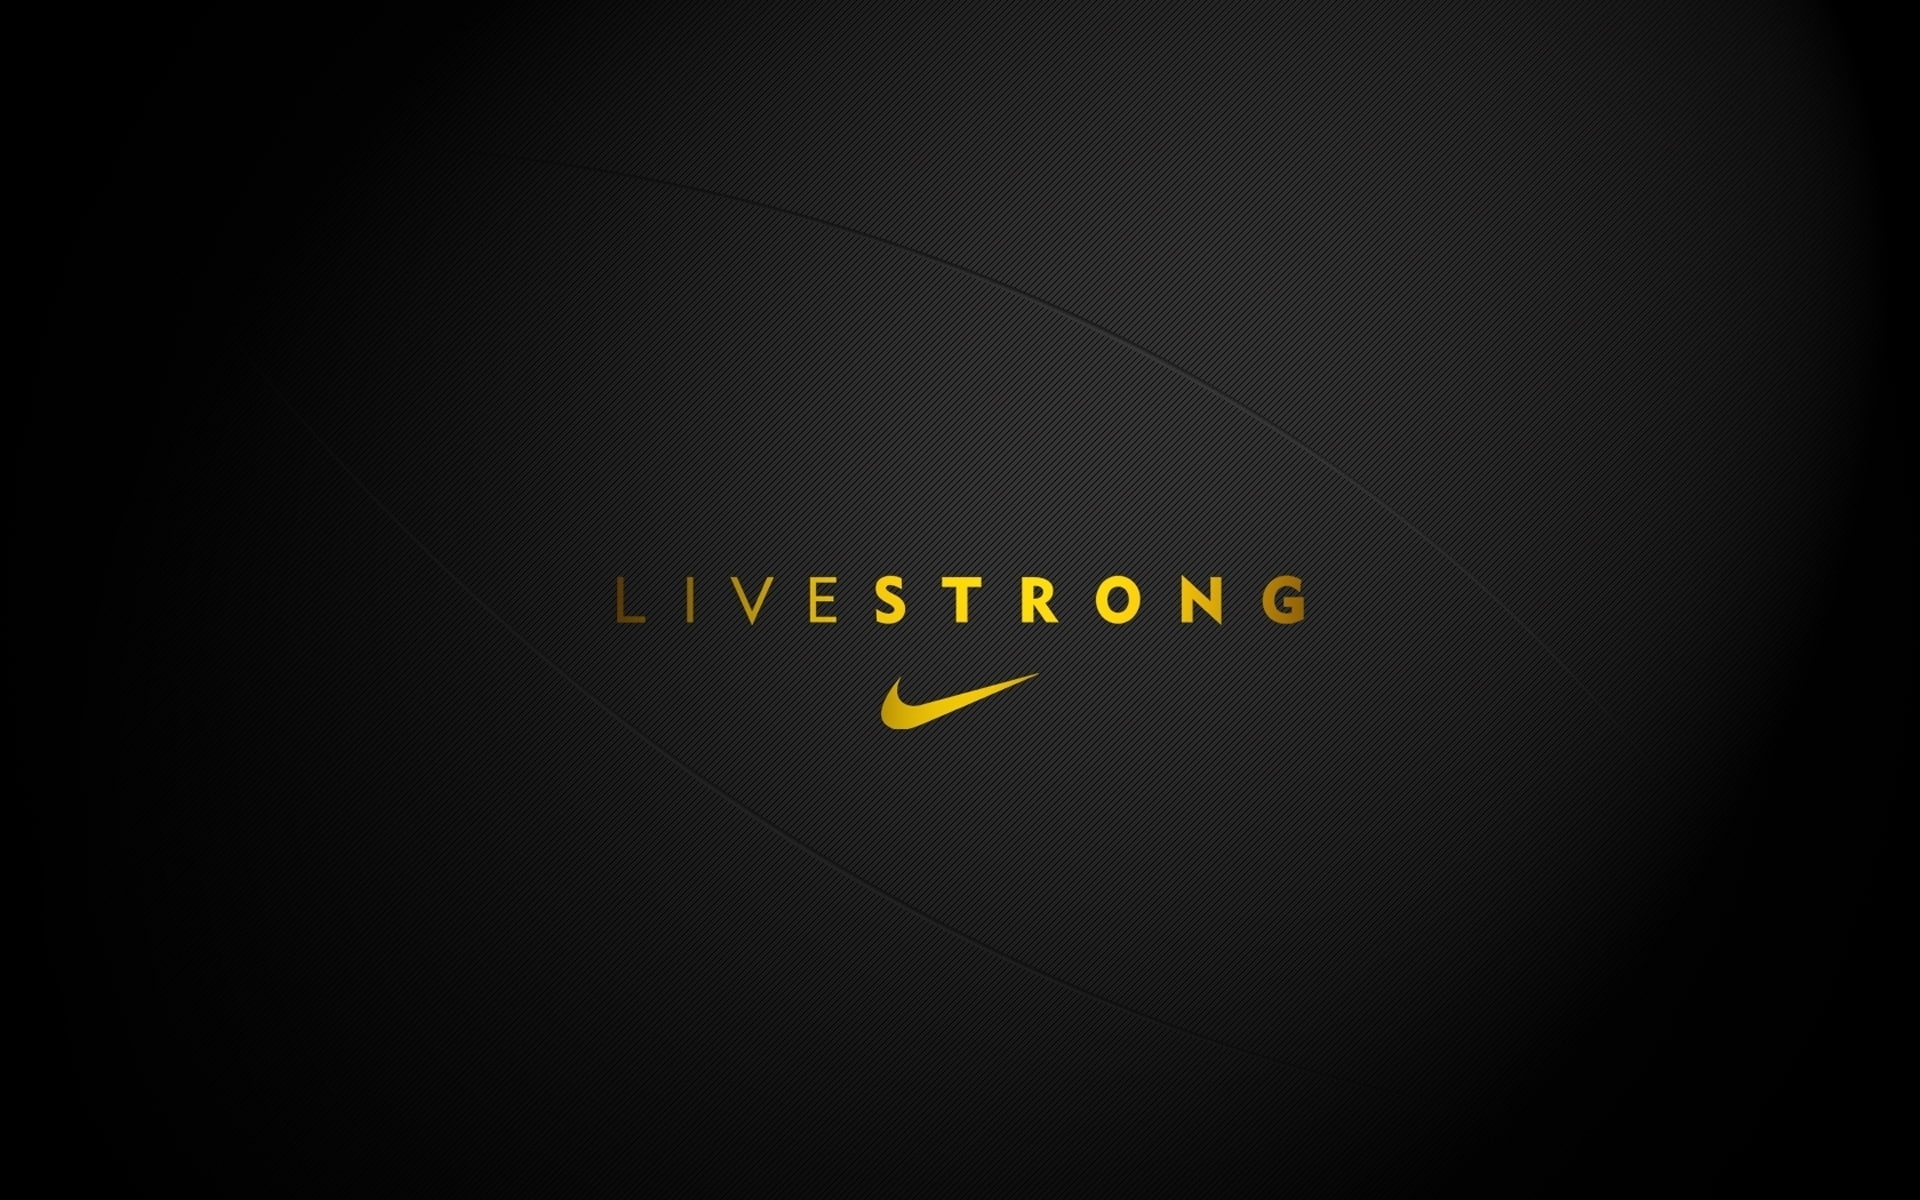 Live Strong Nike, brand, motto, logo, background